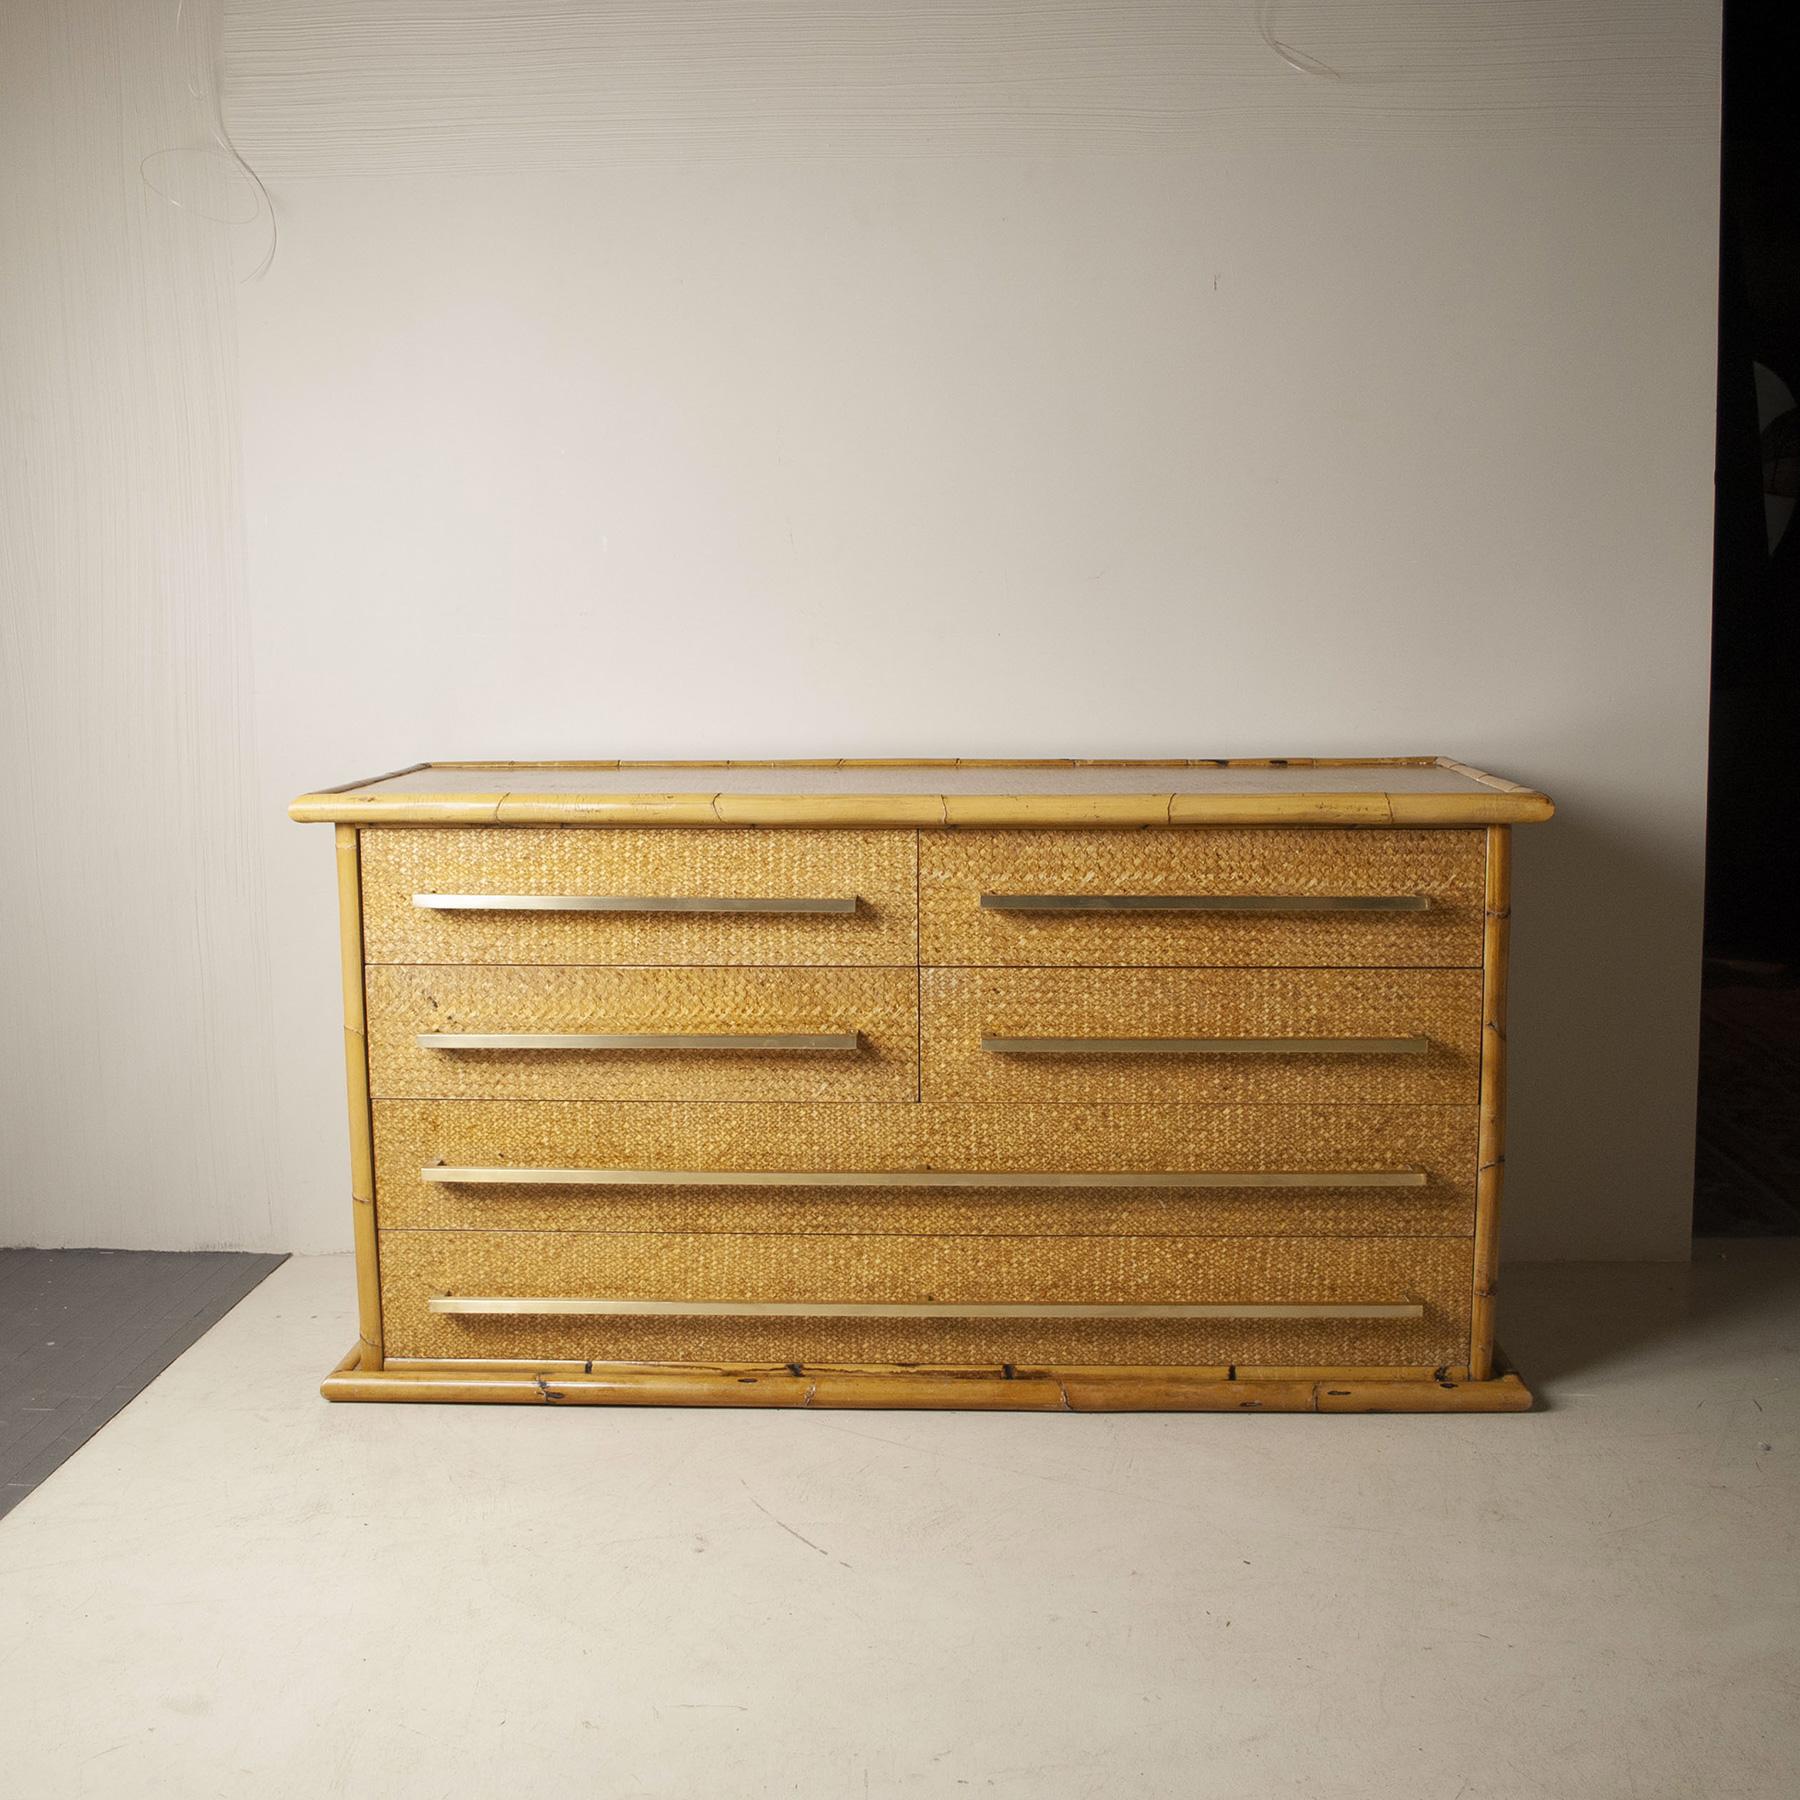 Italian Midcentury Bamboo Sideboard from the Sixties For Sale 2